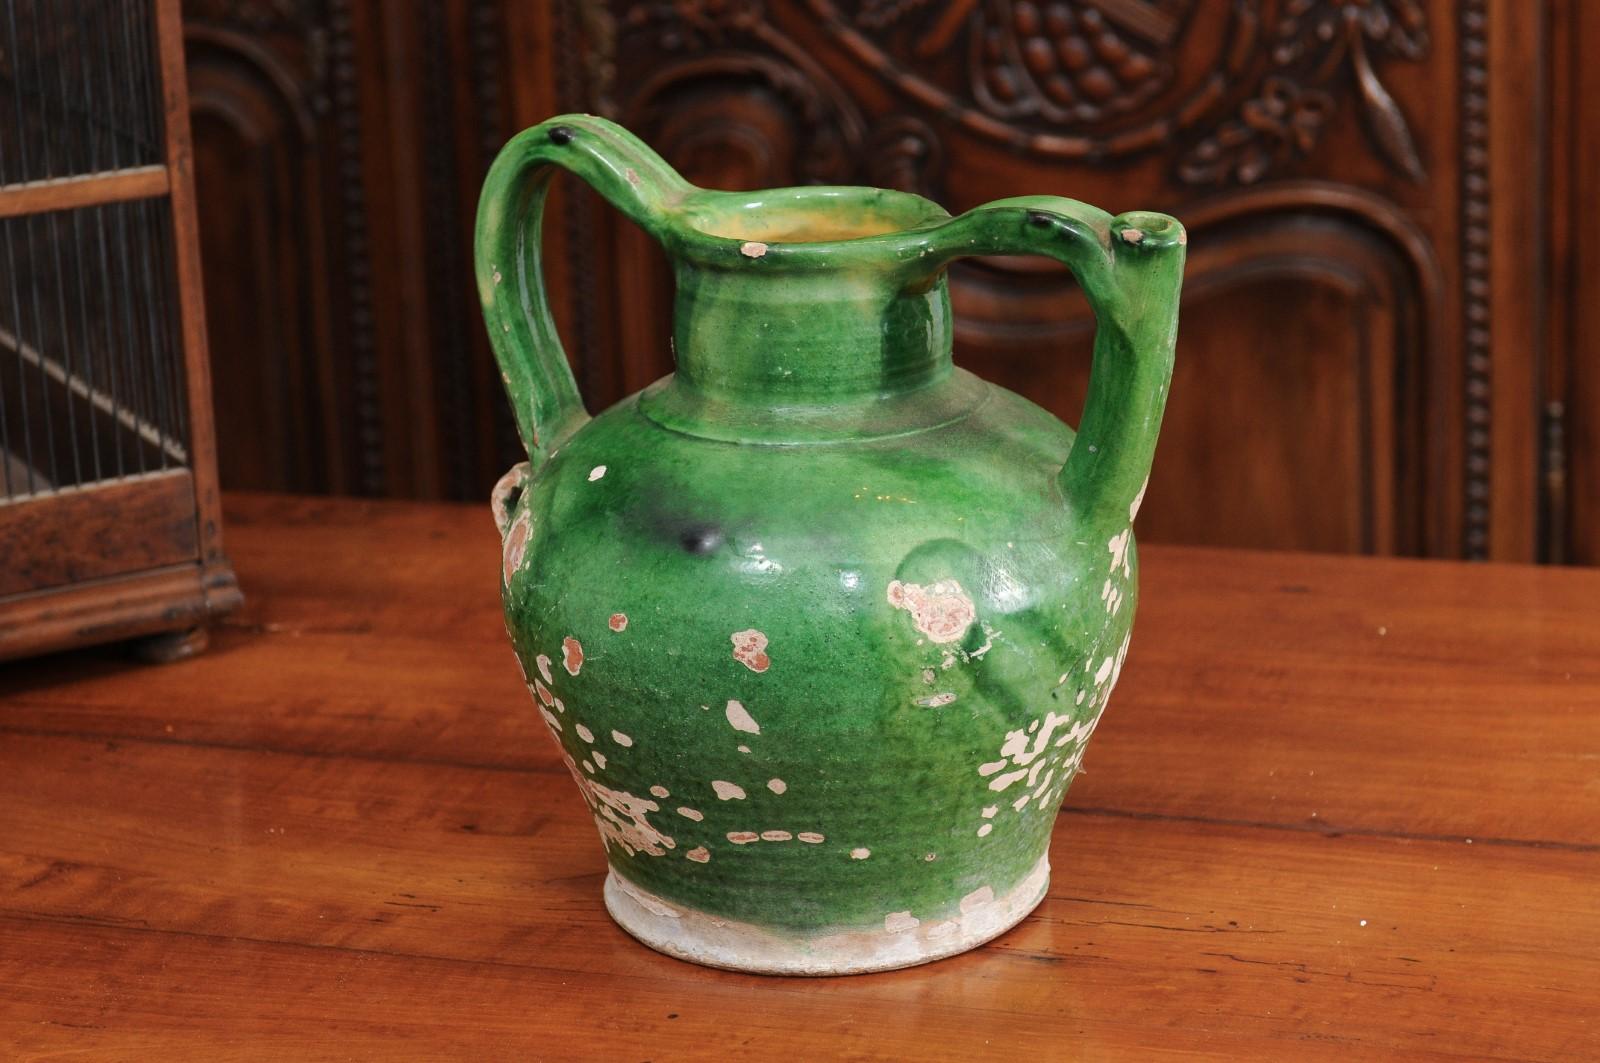 A French Provincial green glazed pottery olive oil jug from the mid-19th century, with double handles, front spout and distressed patina. Created in Southern France at the beginning of Emperor Napoleon III's reign, this jug features a green glazed